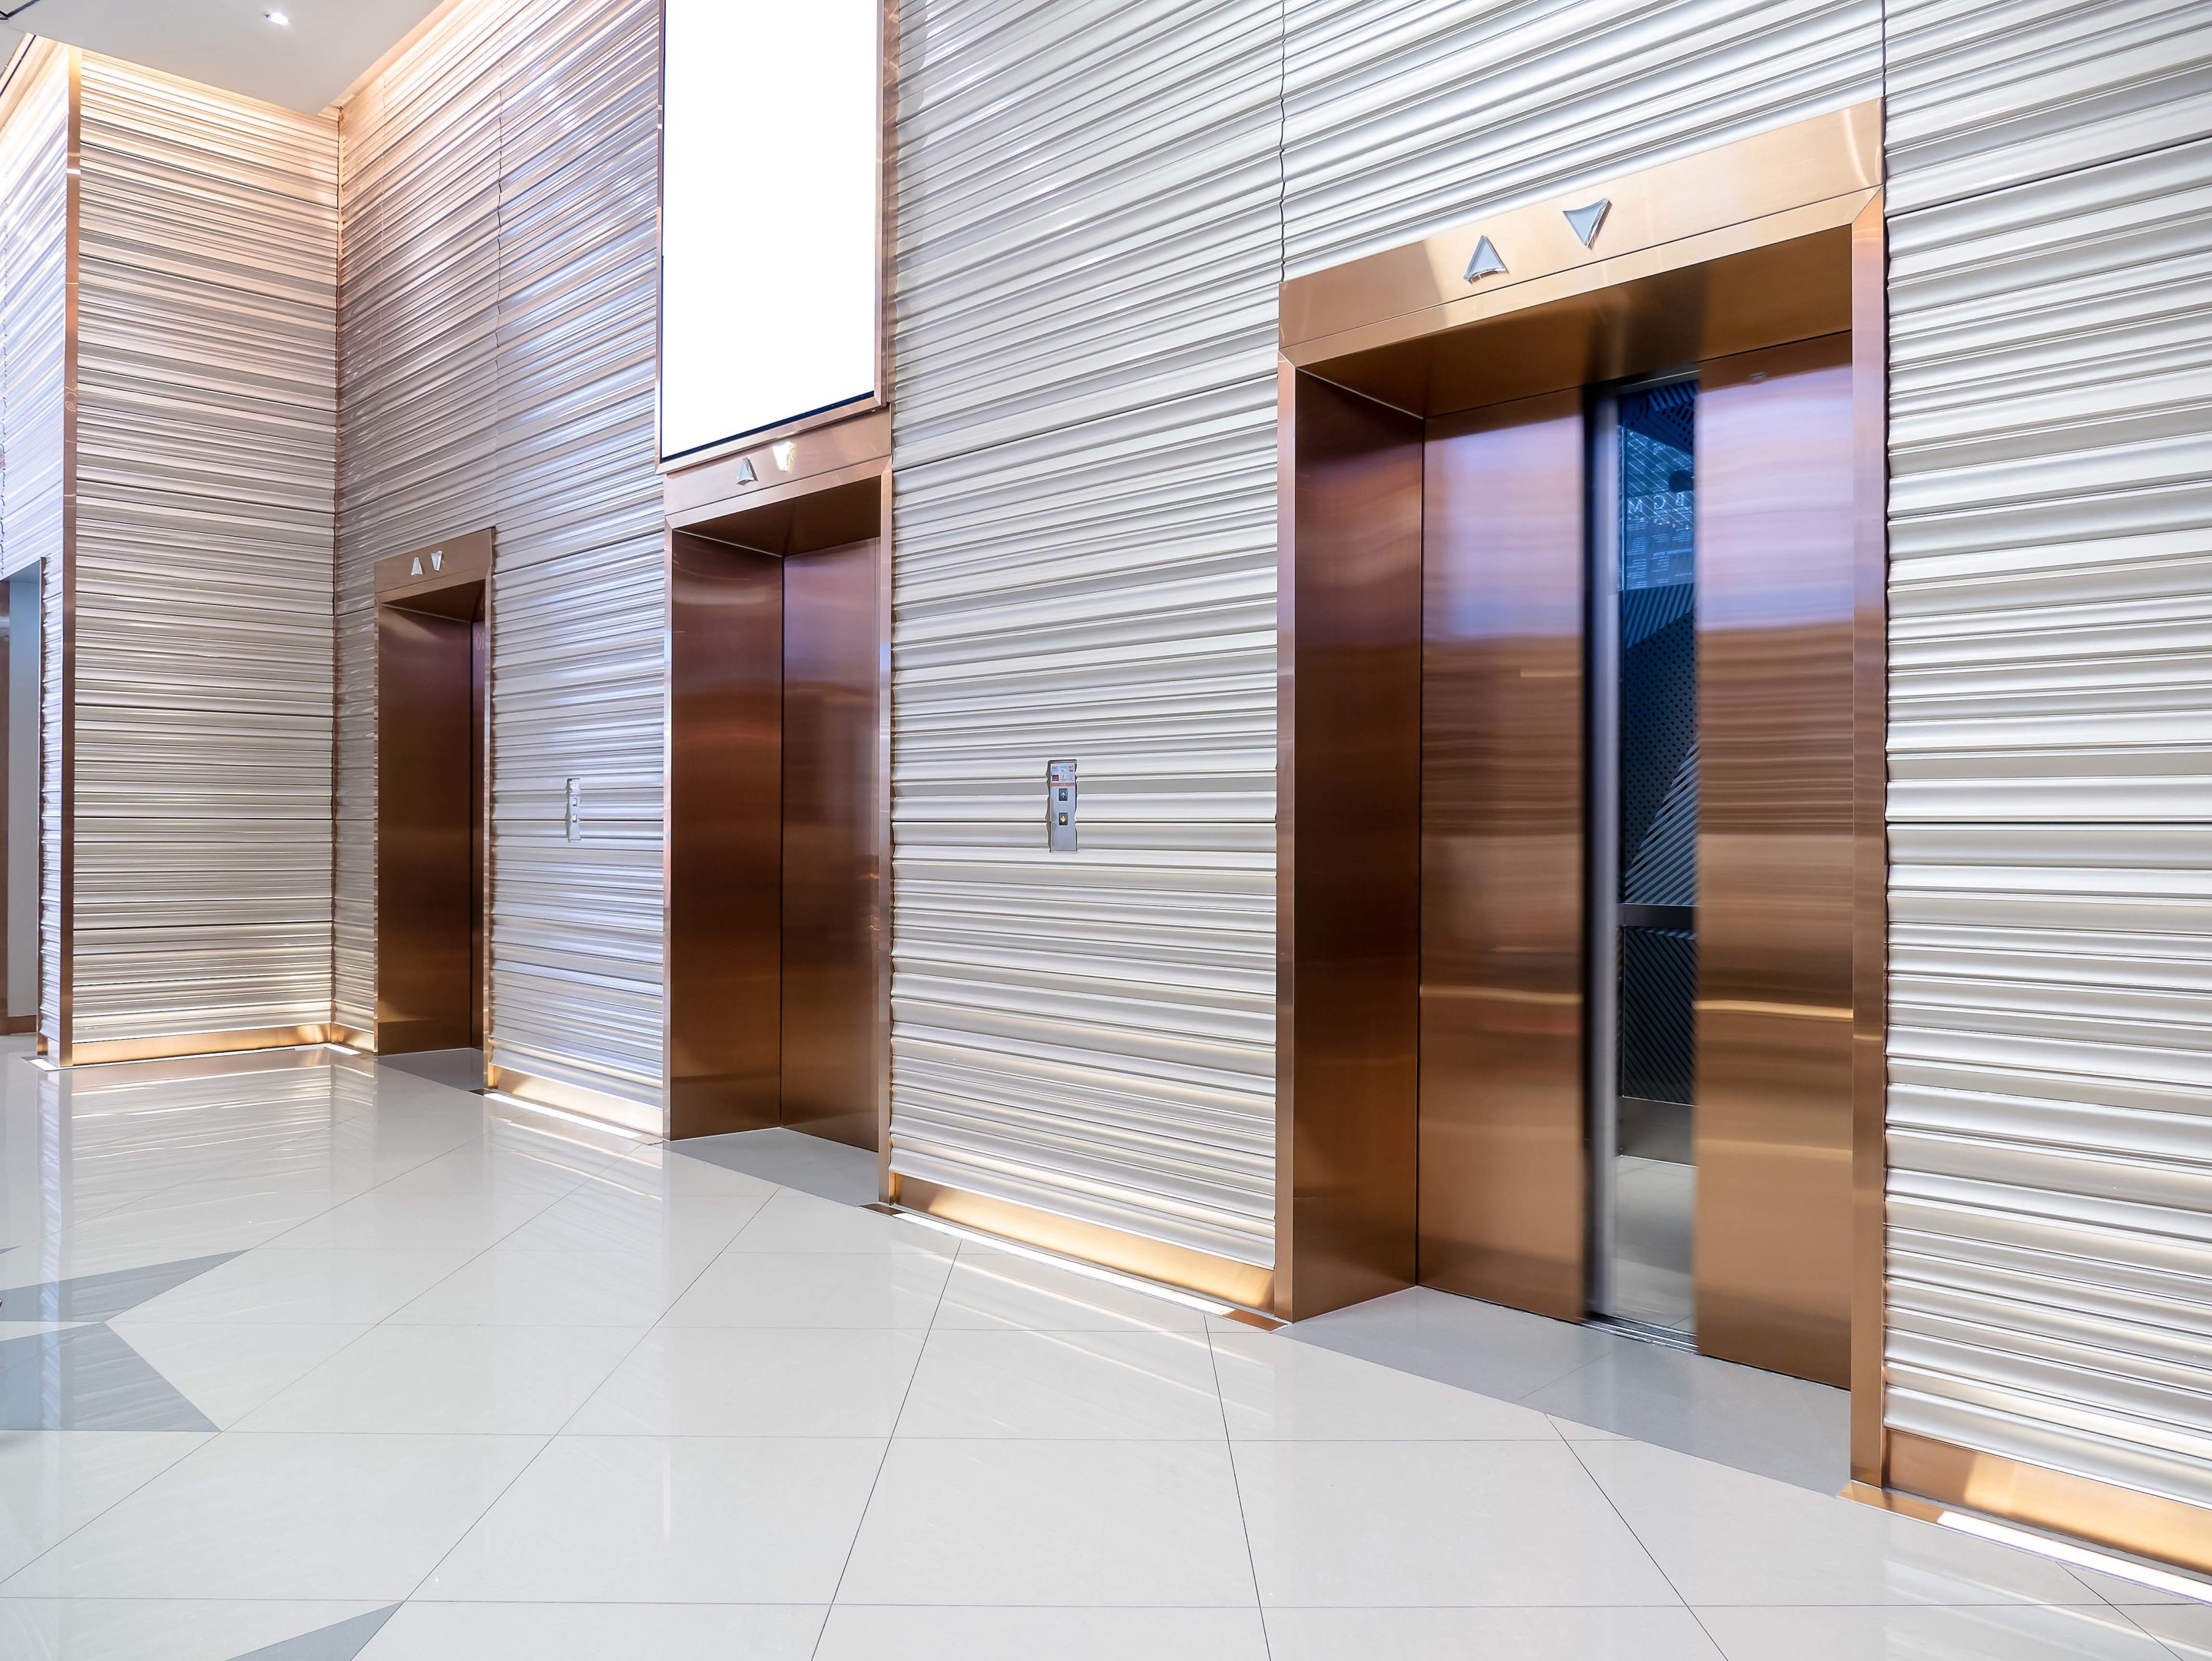 Elevator doors showing elevator security systems